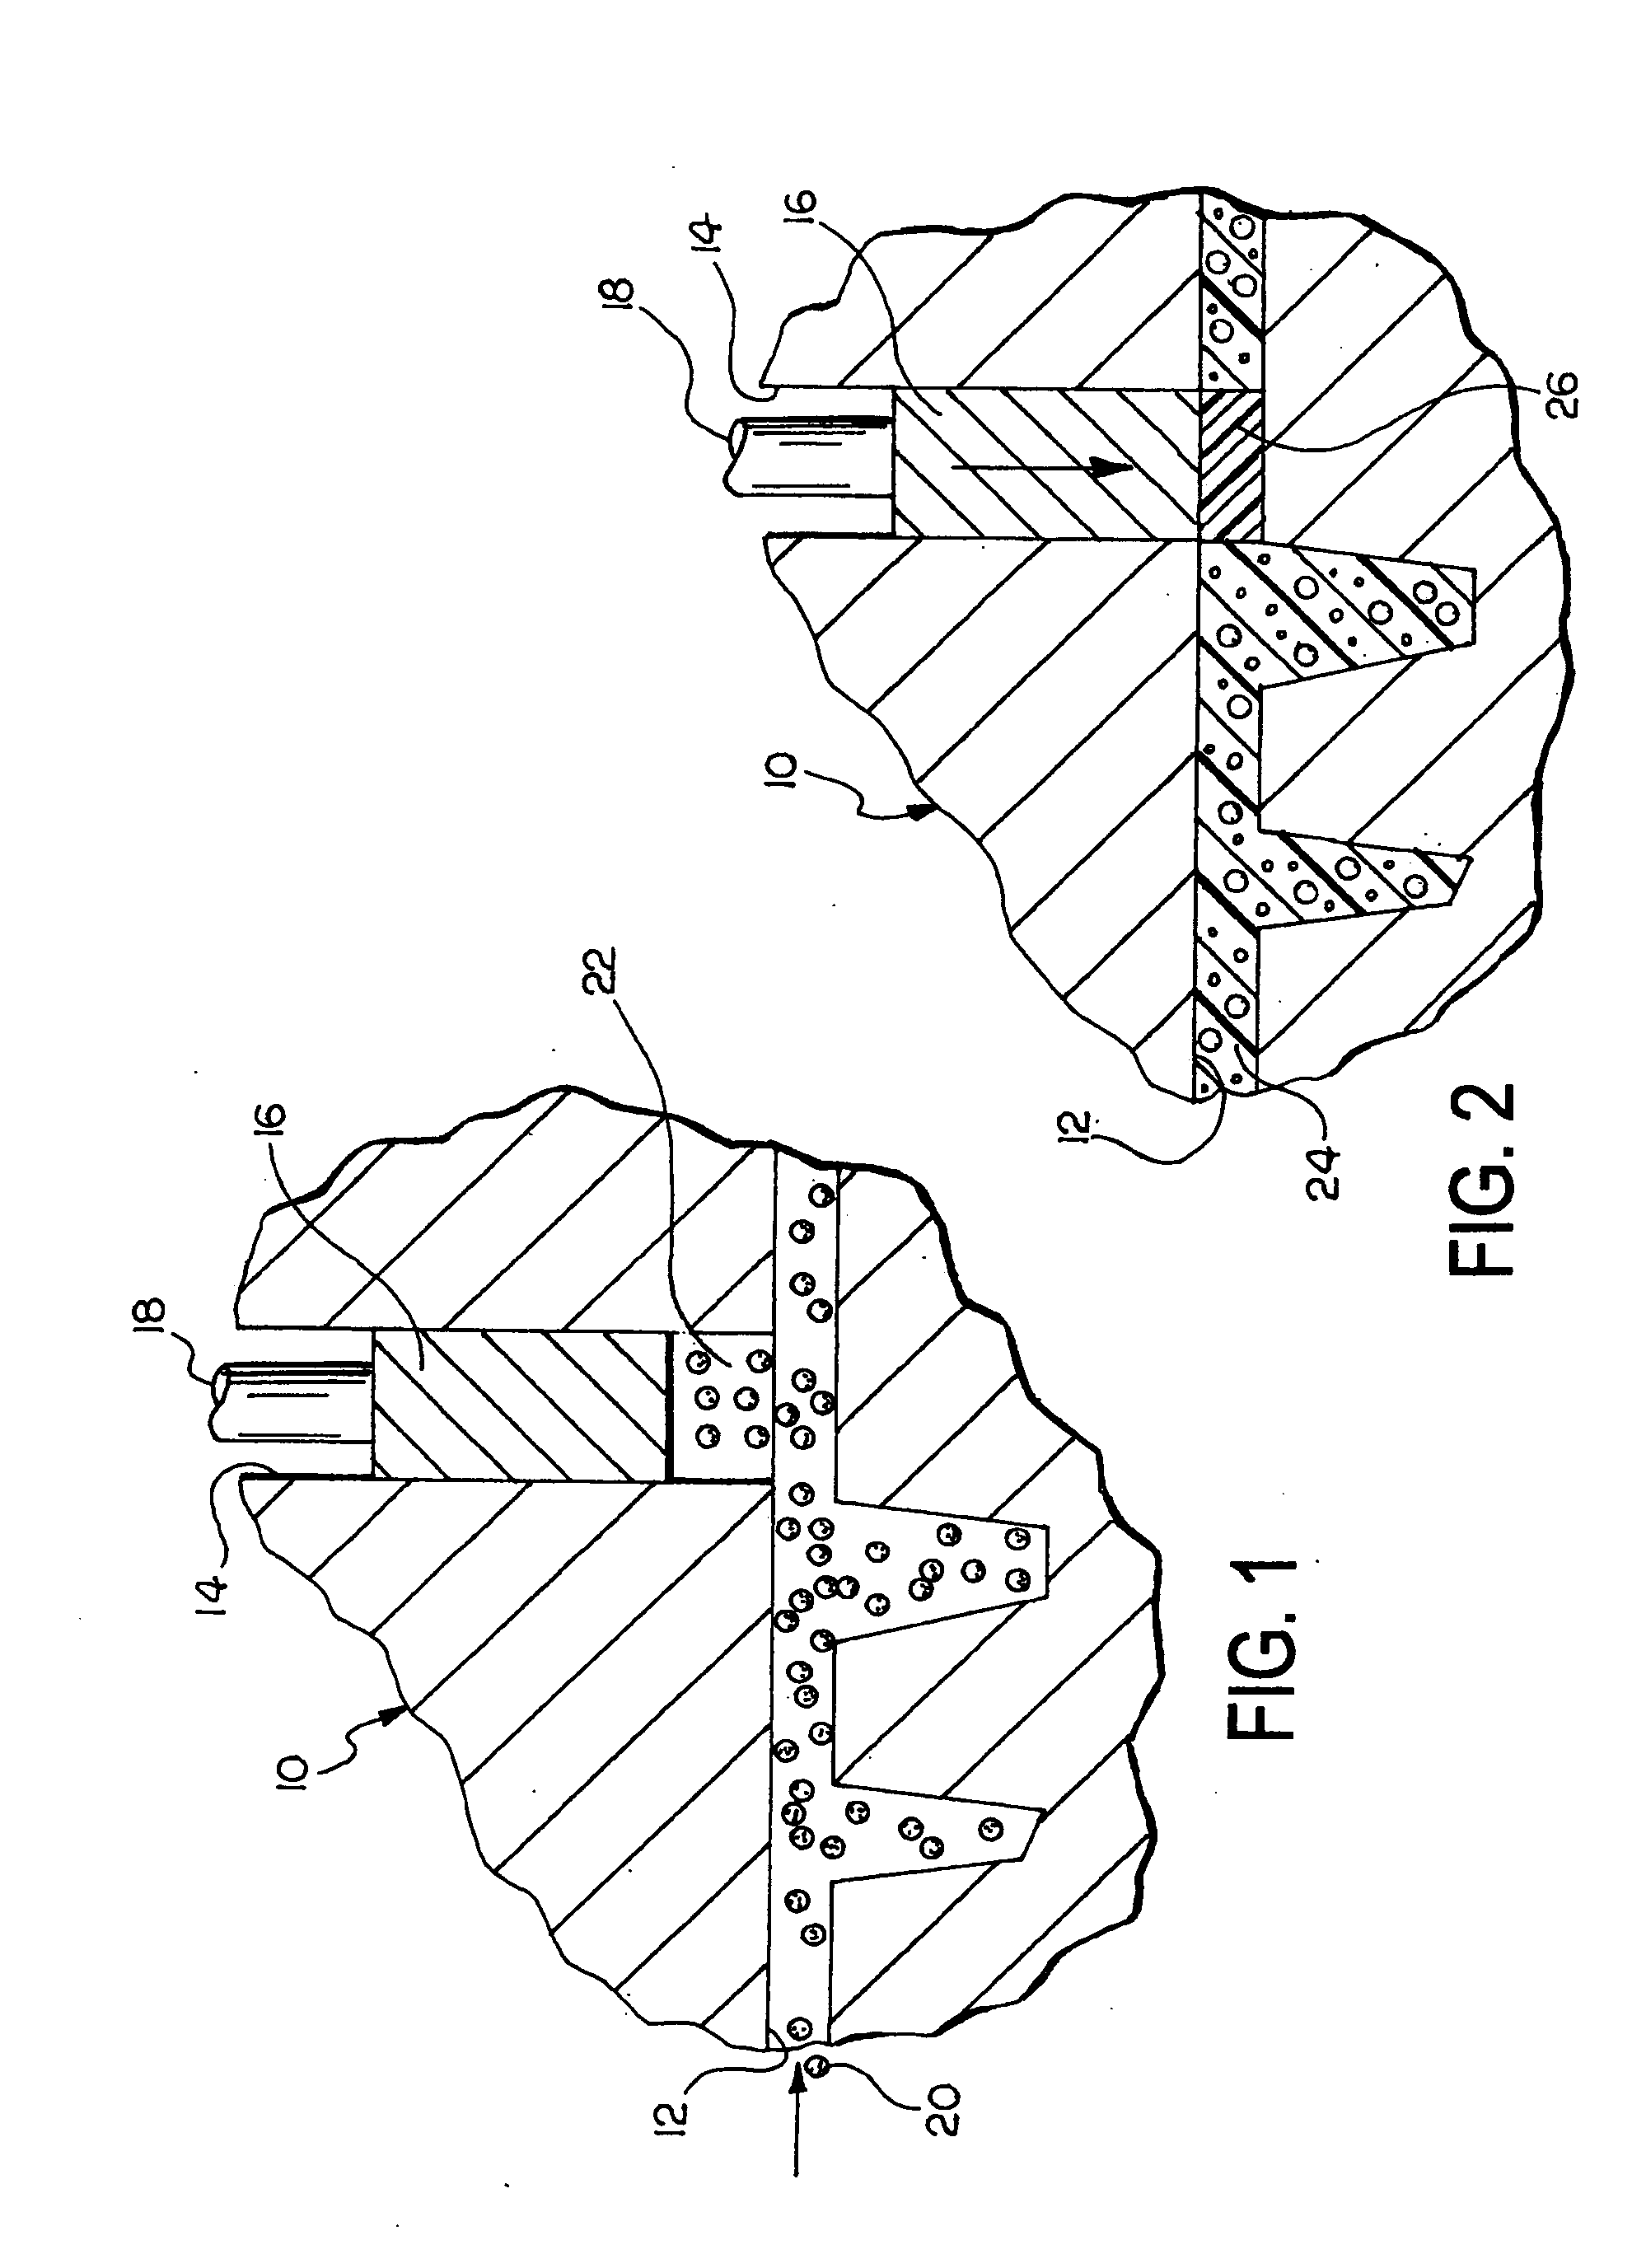 Method and apparatus for controlling dispersion of molten metal in a mold cavity